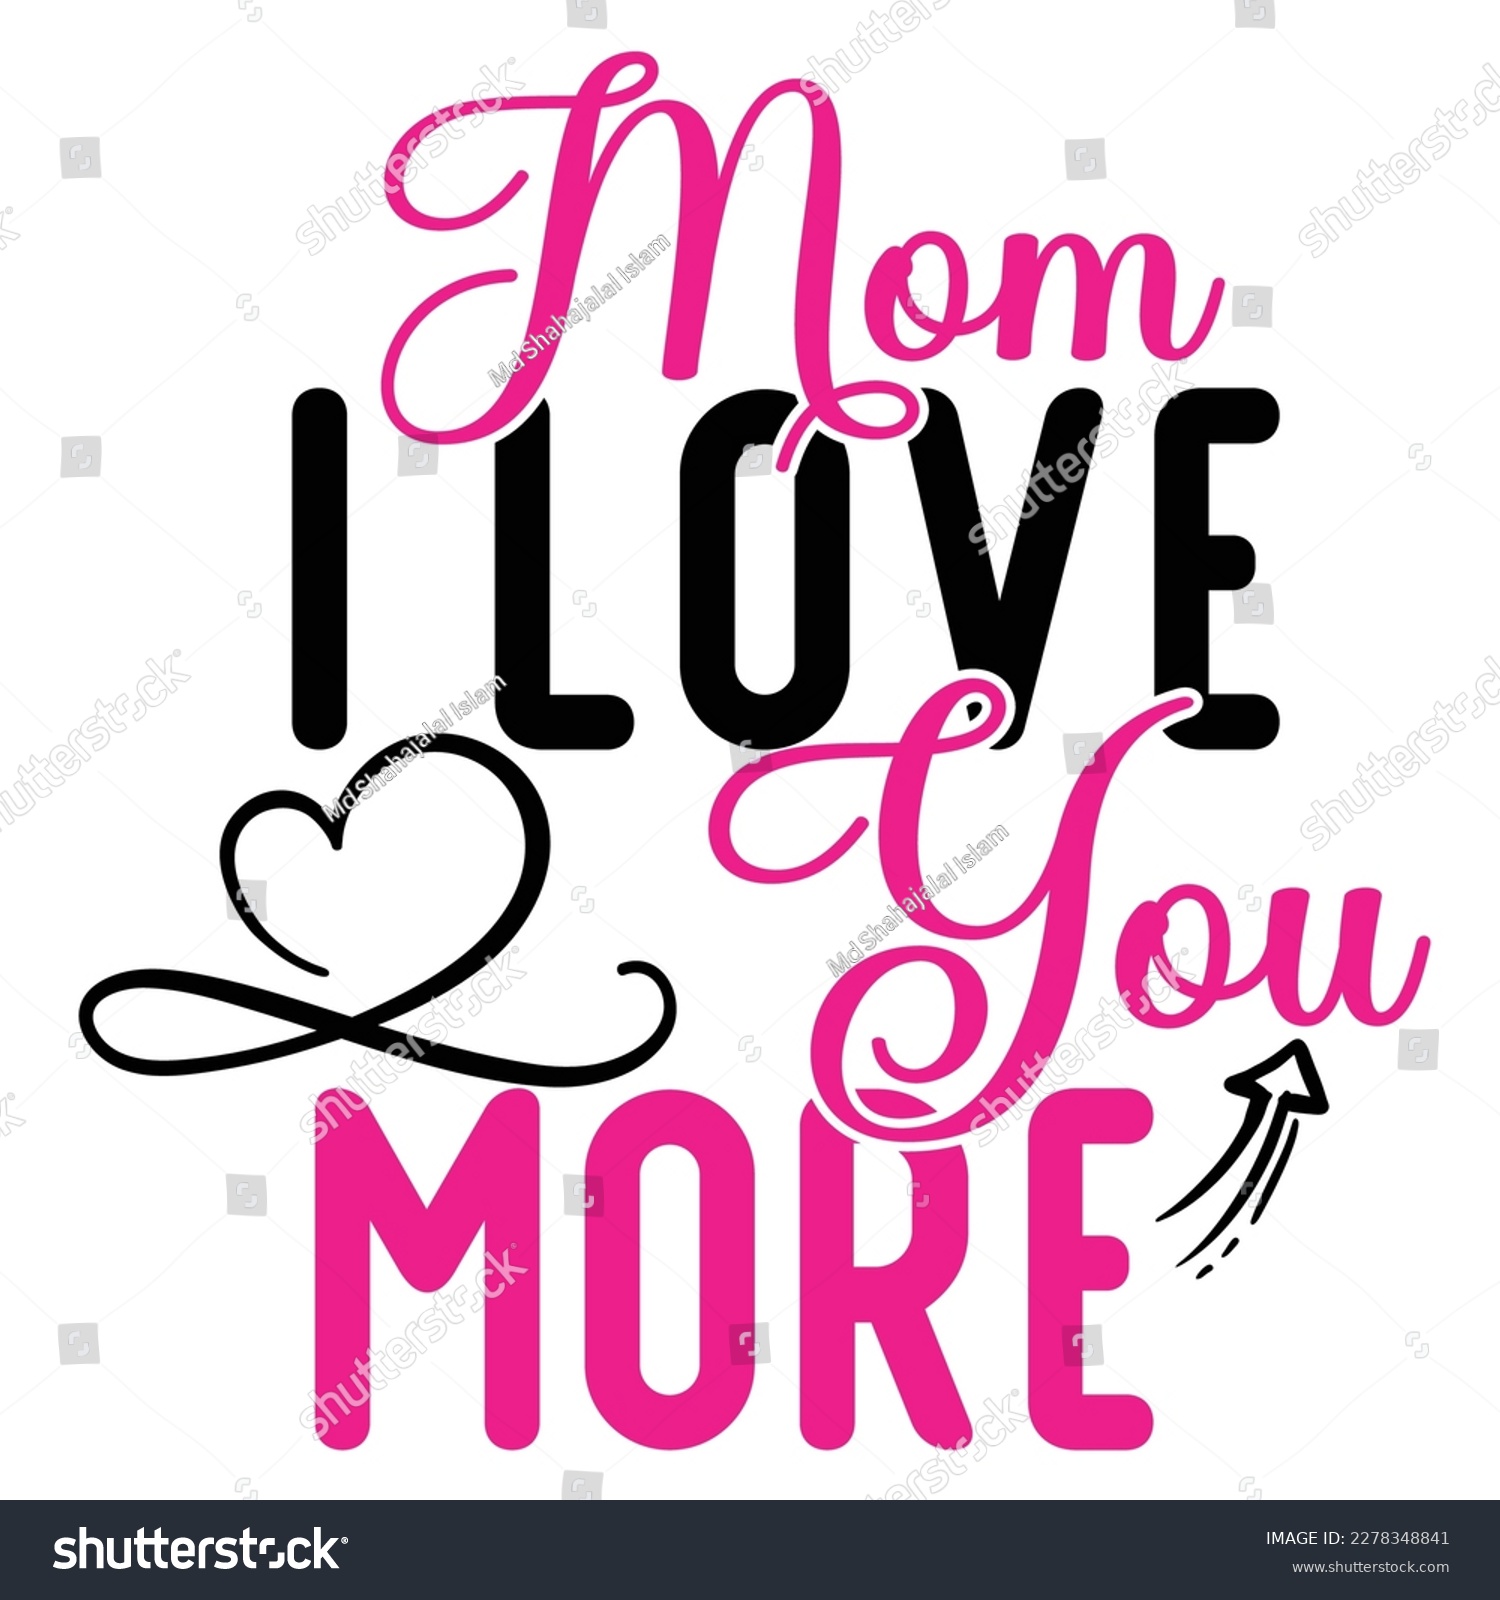 SVG of mom i love you more, Mother's day shirt print template,  typography design for mom mommy mama daughter grandma girl women aunt mom life child best mom adorable shirt svg